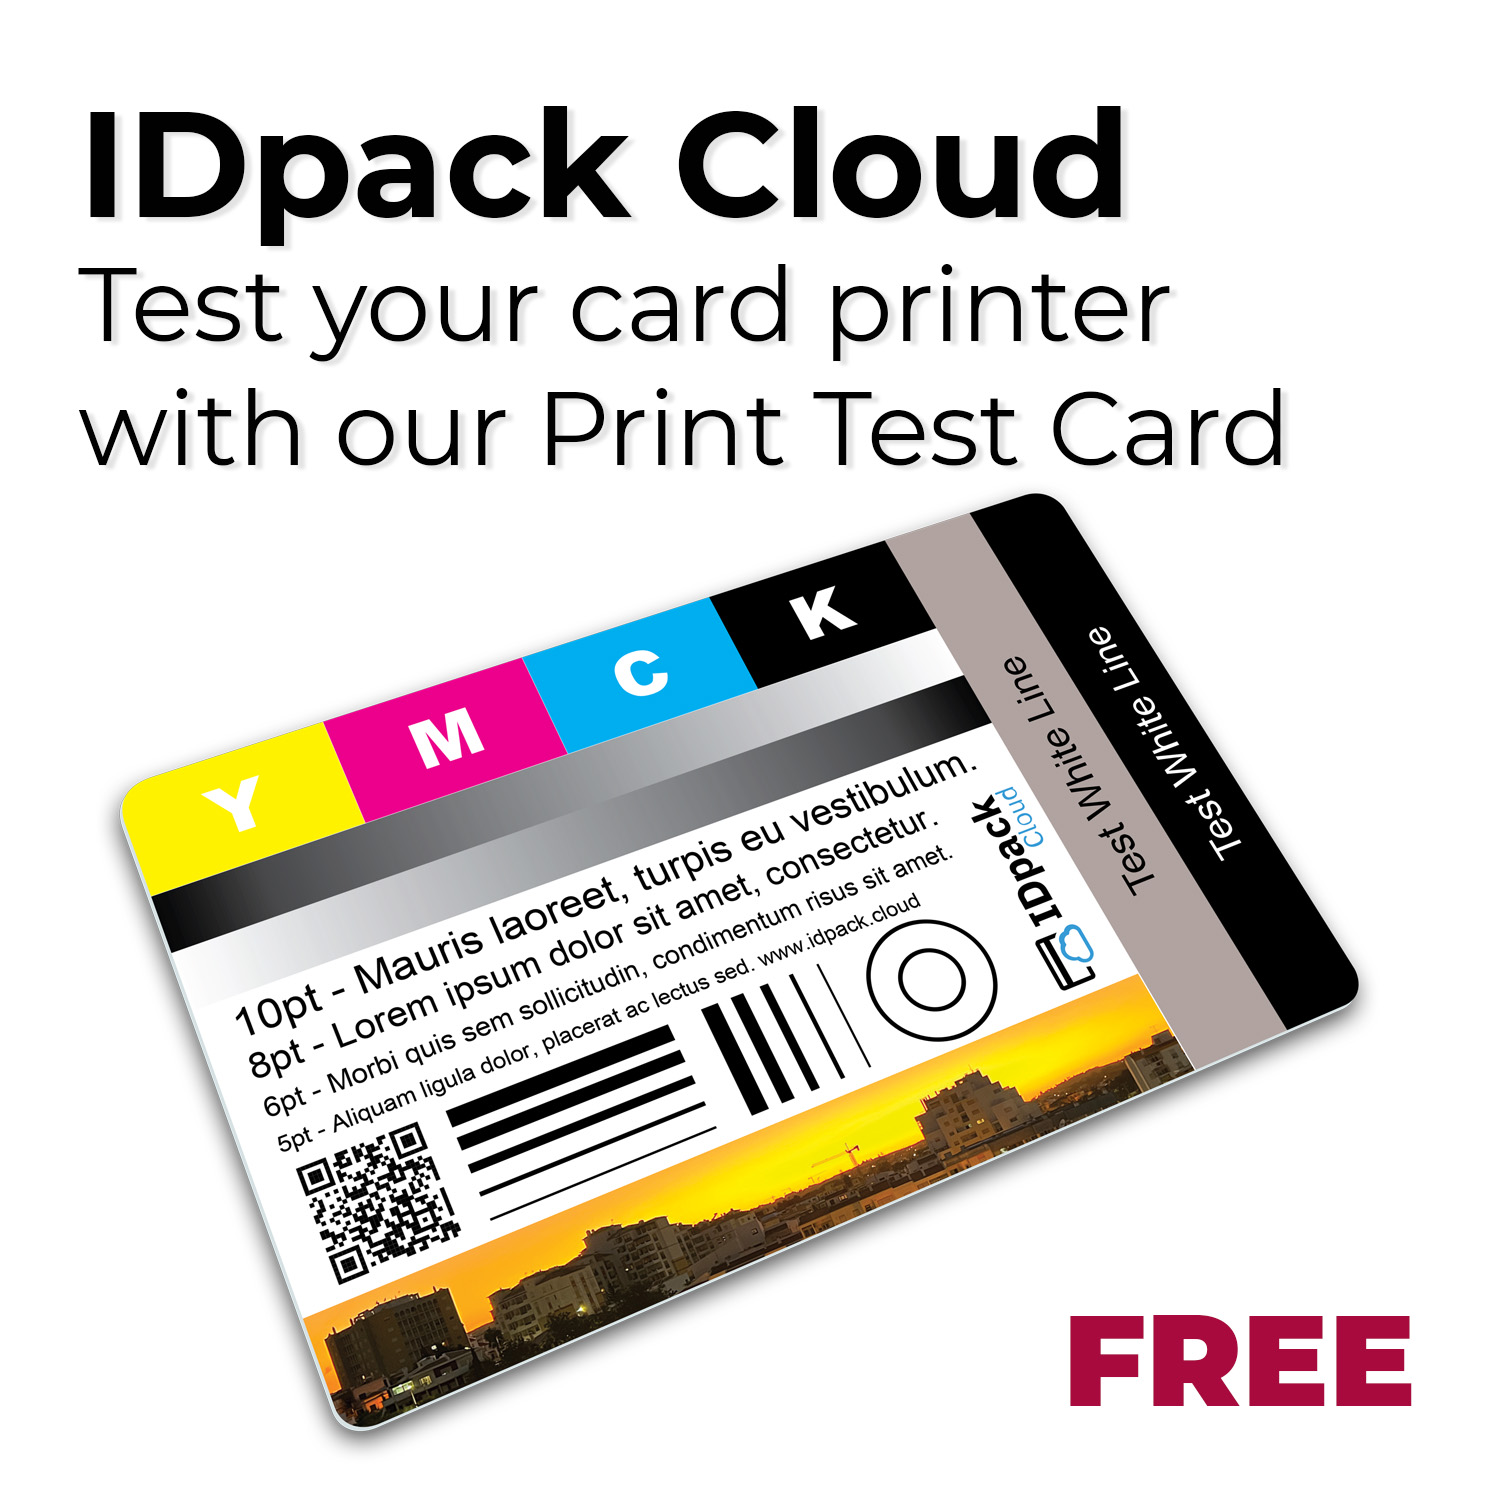 Test your card printer with our FREE Test Card